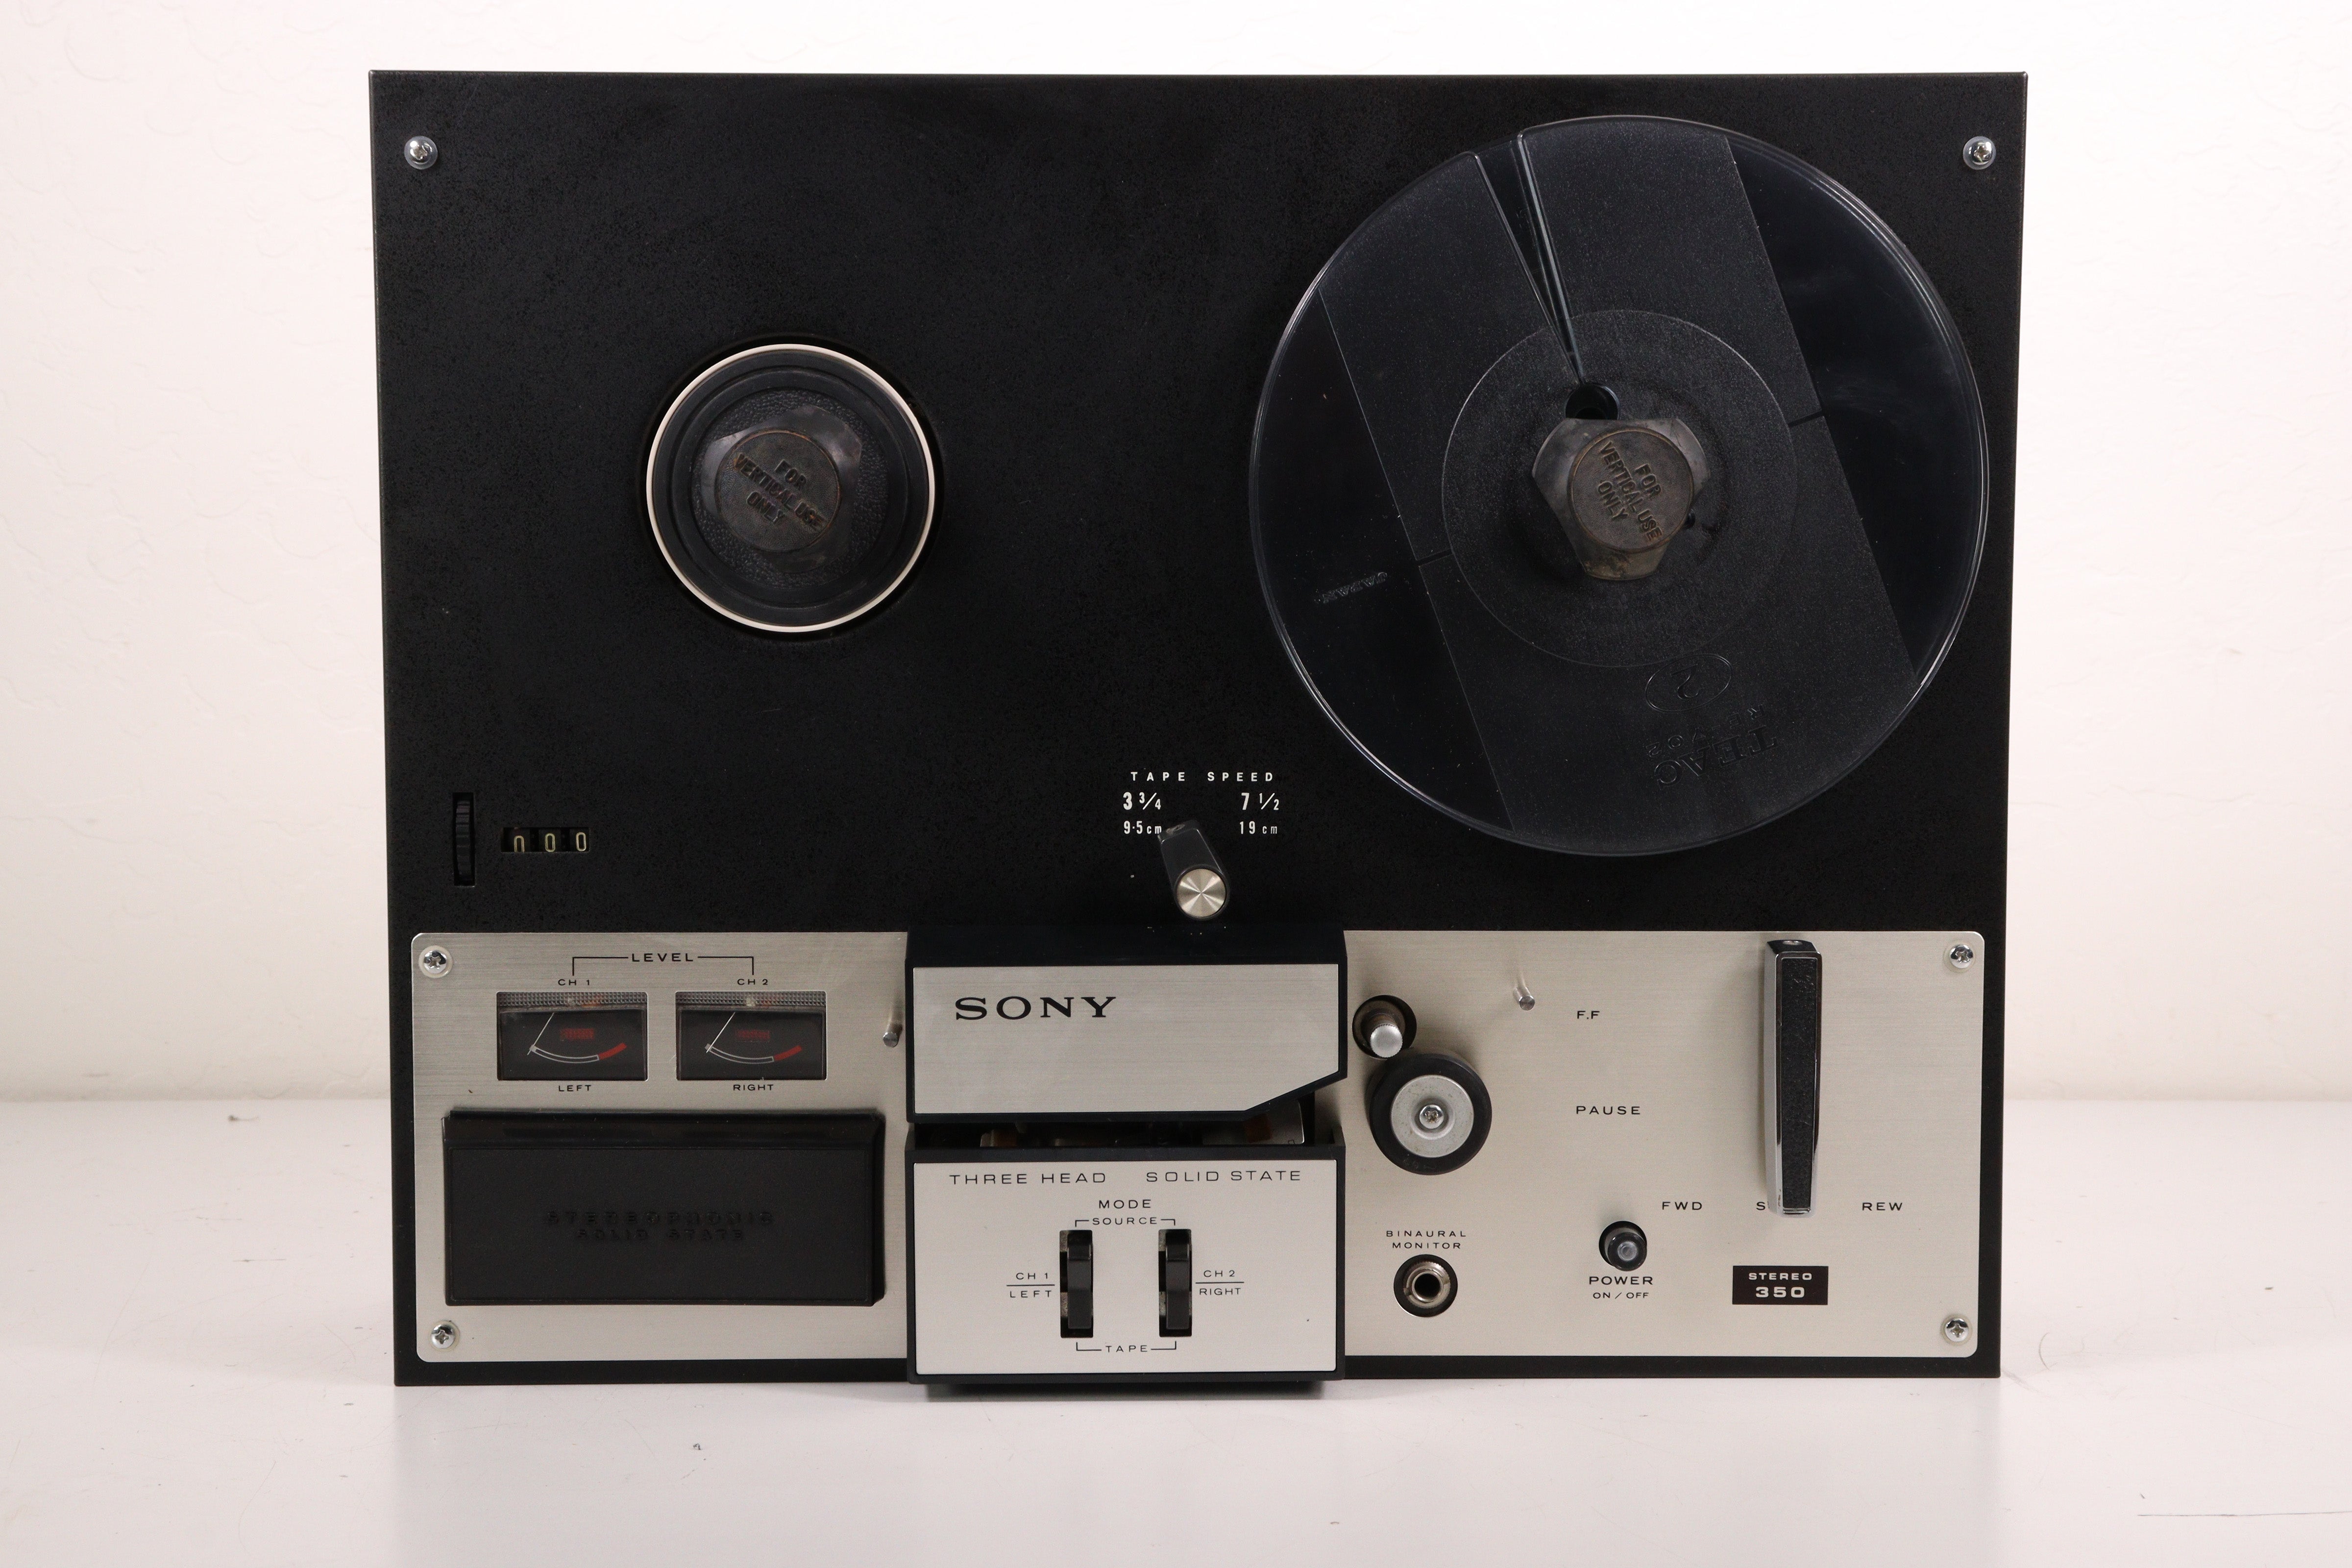 http://spencertified.com/cdn/shop/products/Sony-TC-350-Tapecorder-Reel-To-Reel-Audio-Tape-Player-Recorder-Reel-to-Reel-Tape-Players-Recorders.jpg?v=1674938761